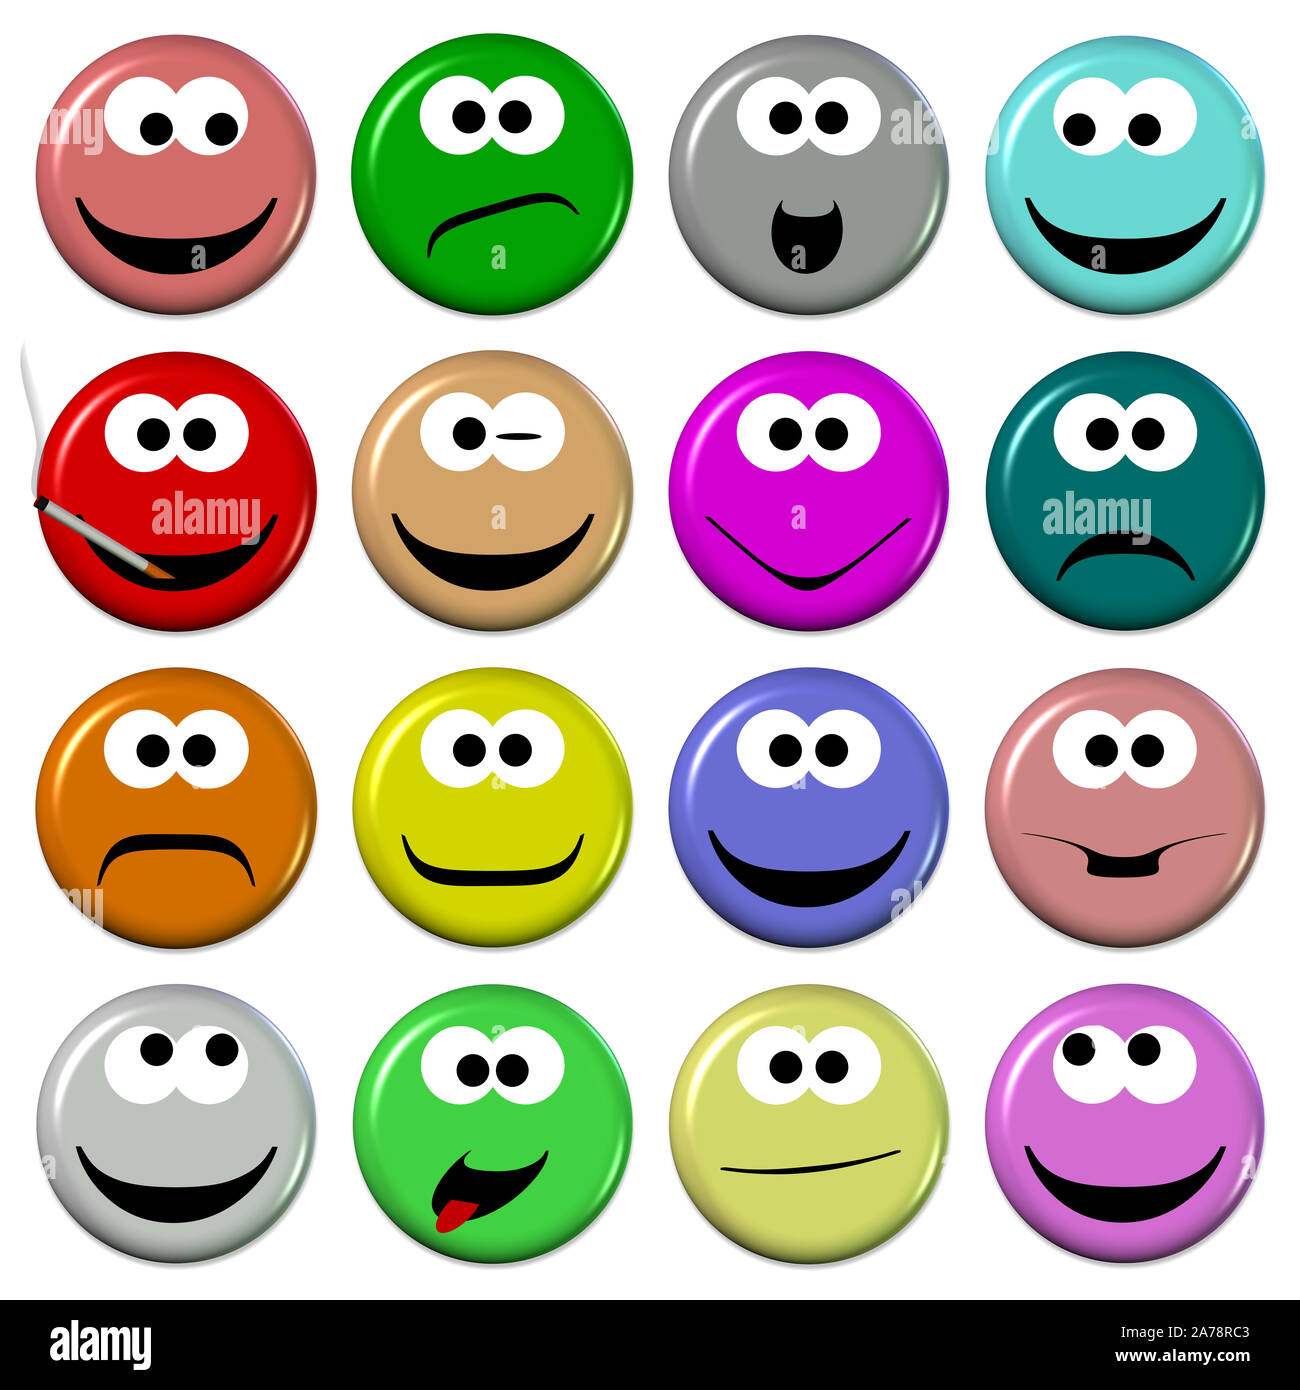 Colorful emojis with different moods Stock Photo - Alamy